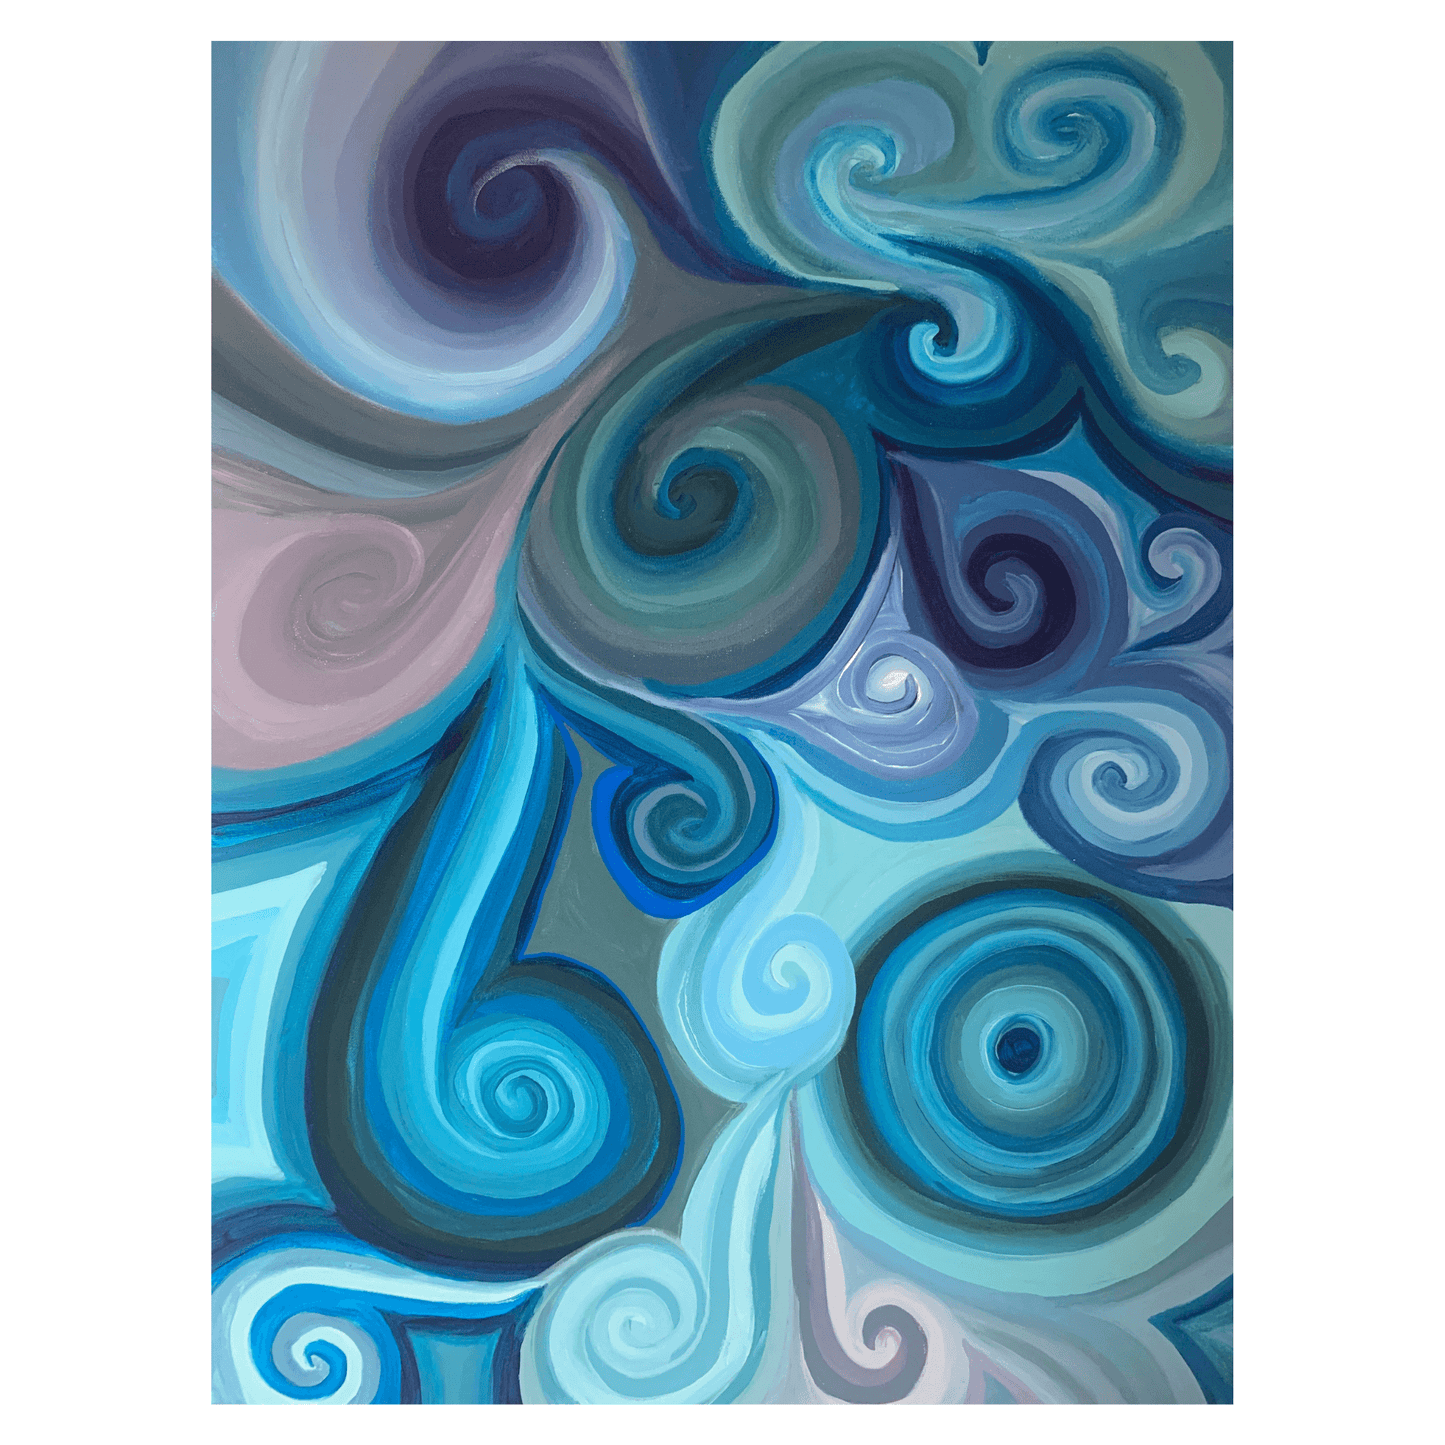 HUES OF BLUE- Abstract Blue Swirl Art